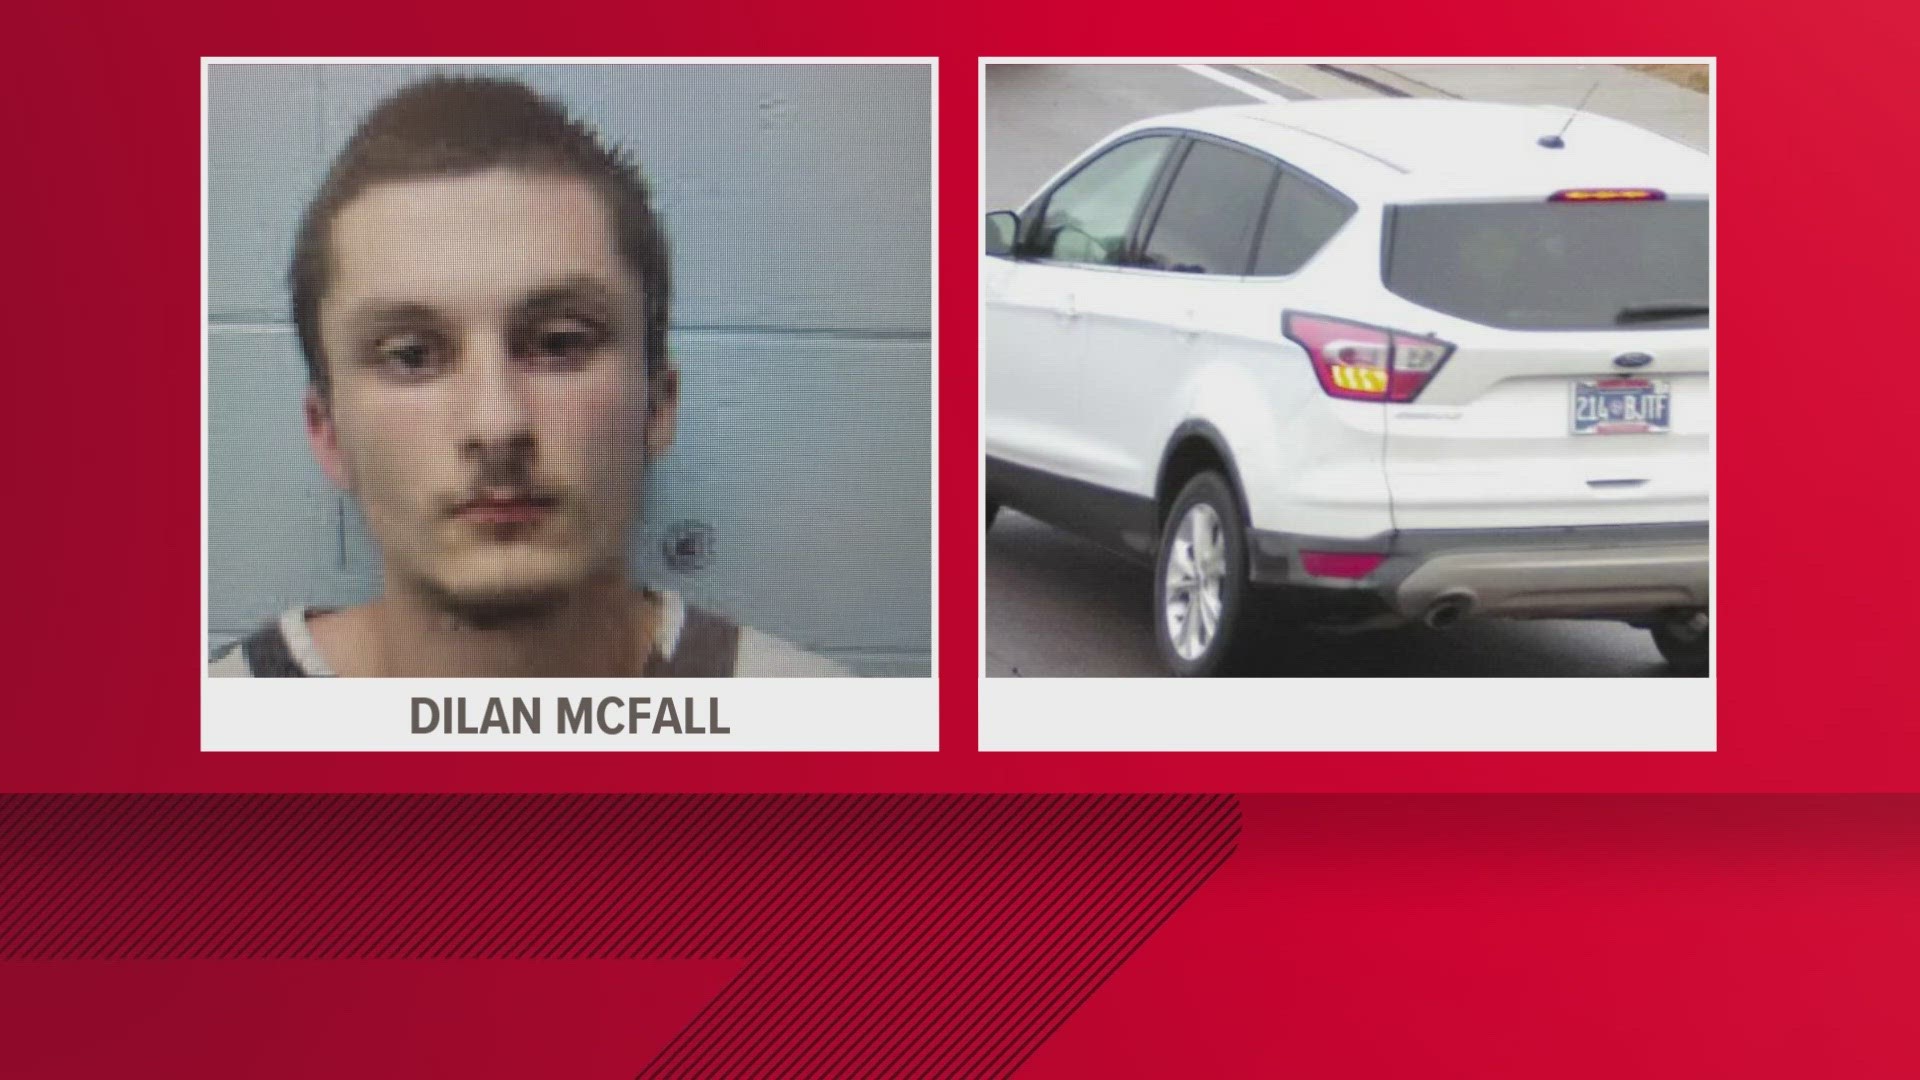 The Grainger County Sheriff's Office said Dilan McFall, 21, was wanted for questioning after the homicide.